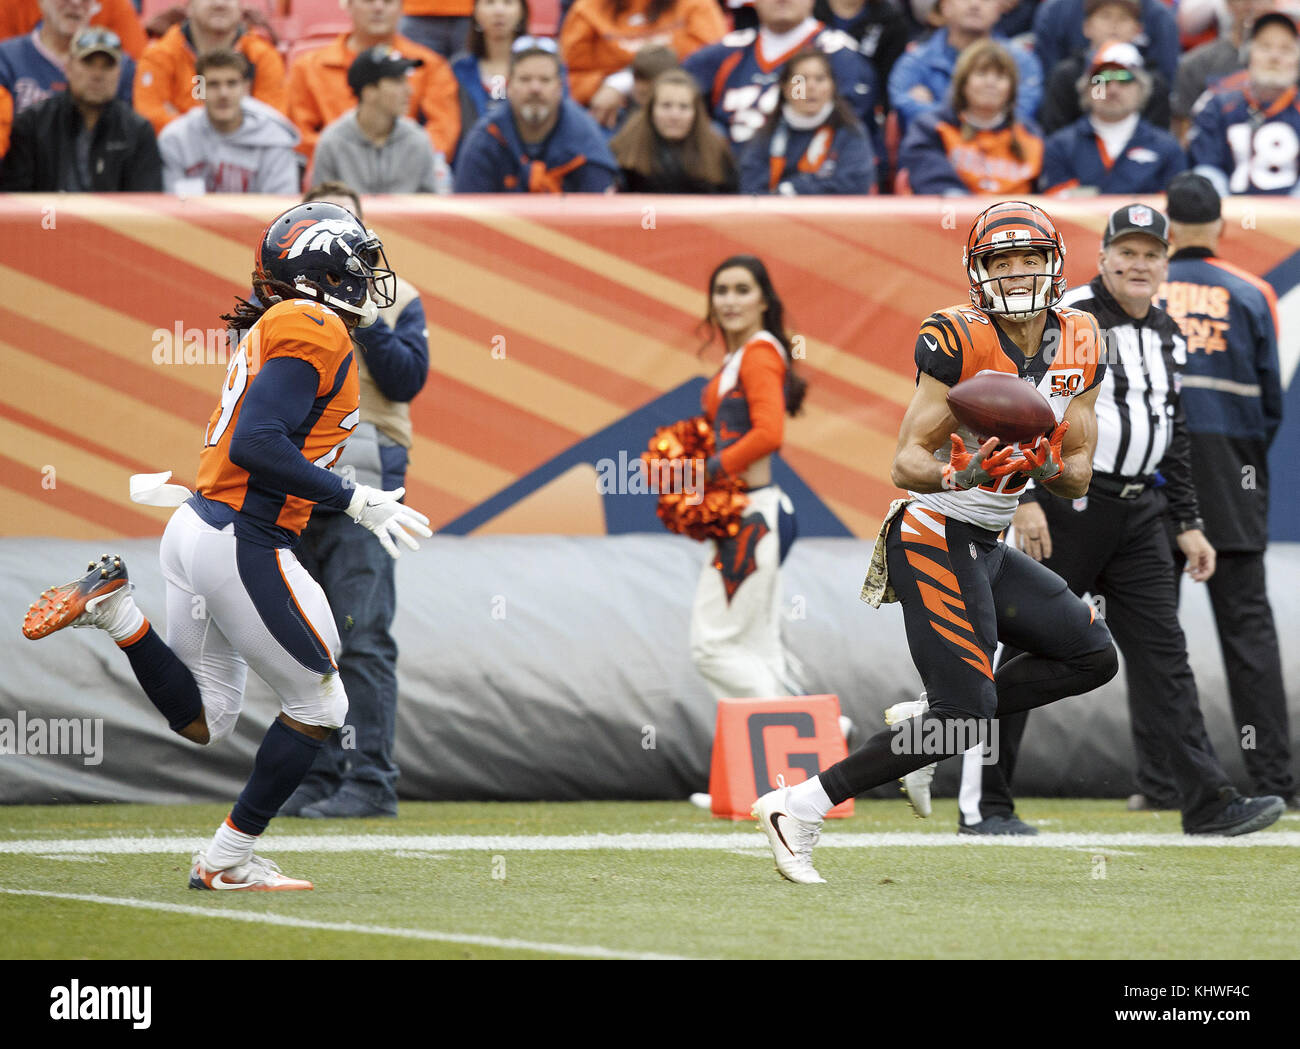 Denver, Colorado, USA. 19th Nov, 2017. Bengals WR ALEX ERICKSON, right, runs in a TD pass past Broncos CB BRADLEY ROBY, left, during the 1st. half at Sports Authority Field at Mile High Sunday afternoon in Denver, CO. The Broncos lose to the Bengals 20-17. Credit: Hector Acevedo/ZUMA Wire/Alamy Live News Stock Photo